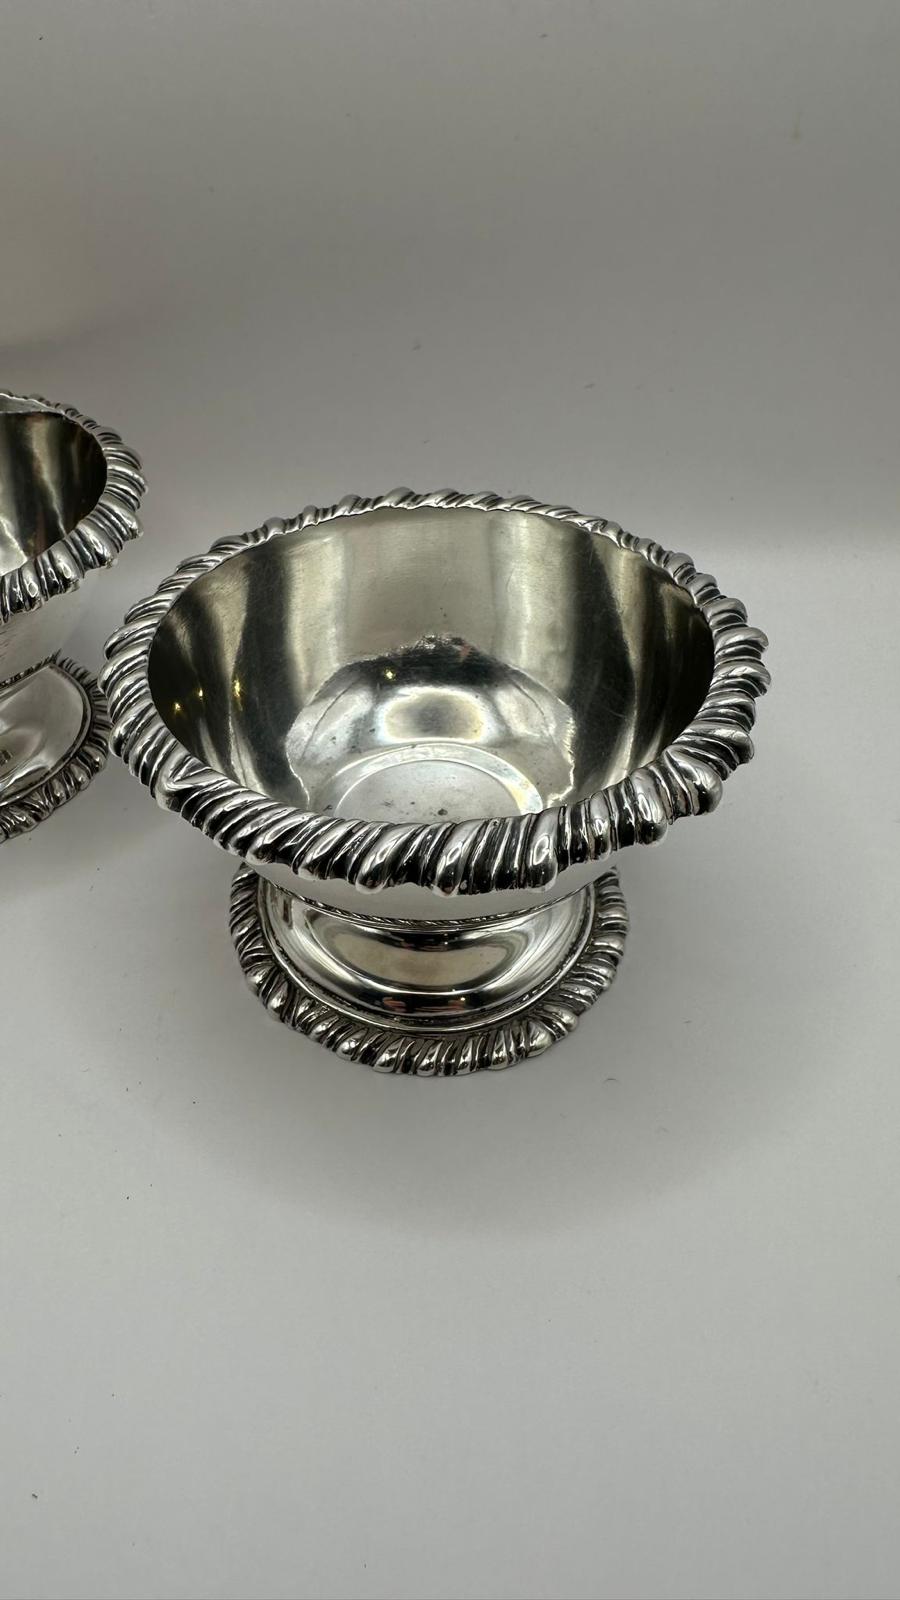 Antique Pair Of Silver Salts Dishes  / Collectible Silver / 1890 Mappin Webb